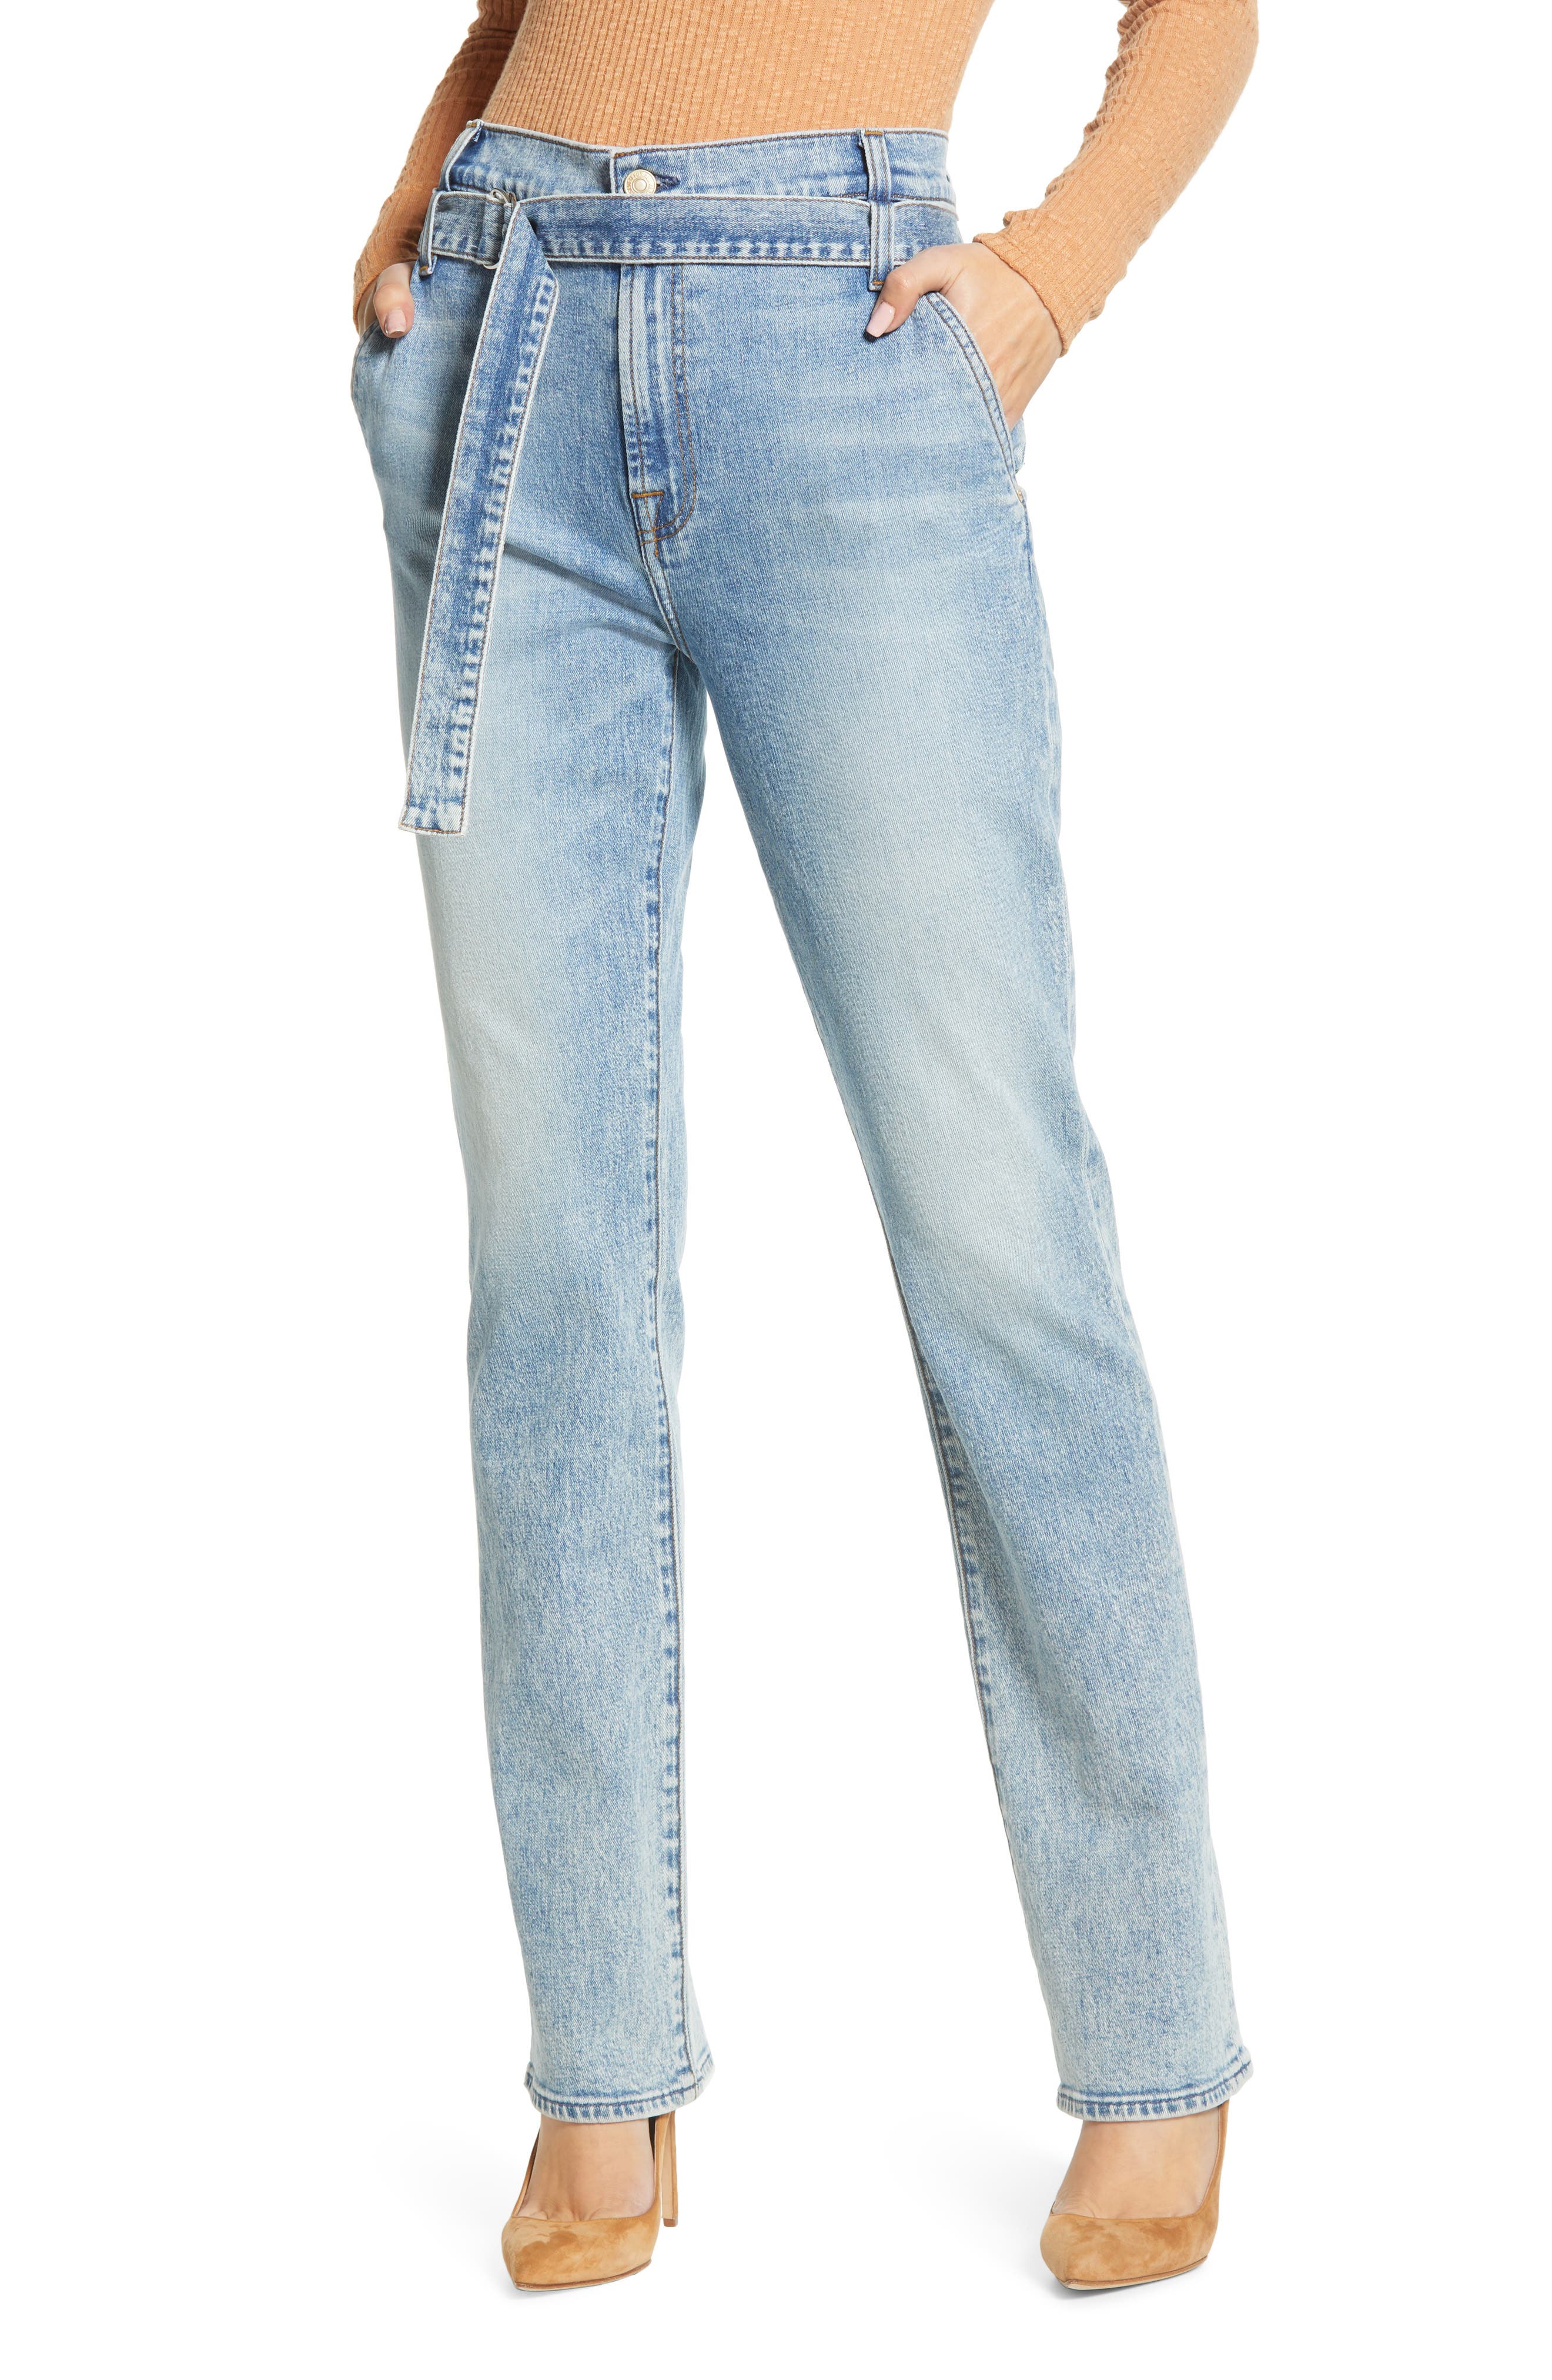 7 for all mankind straight leg